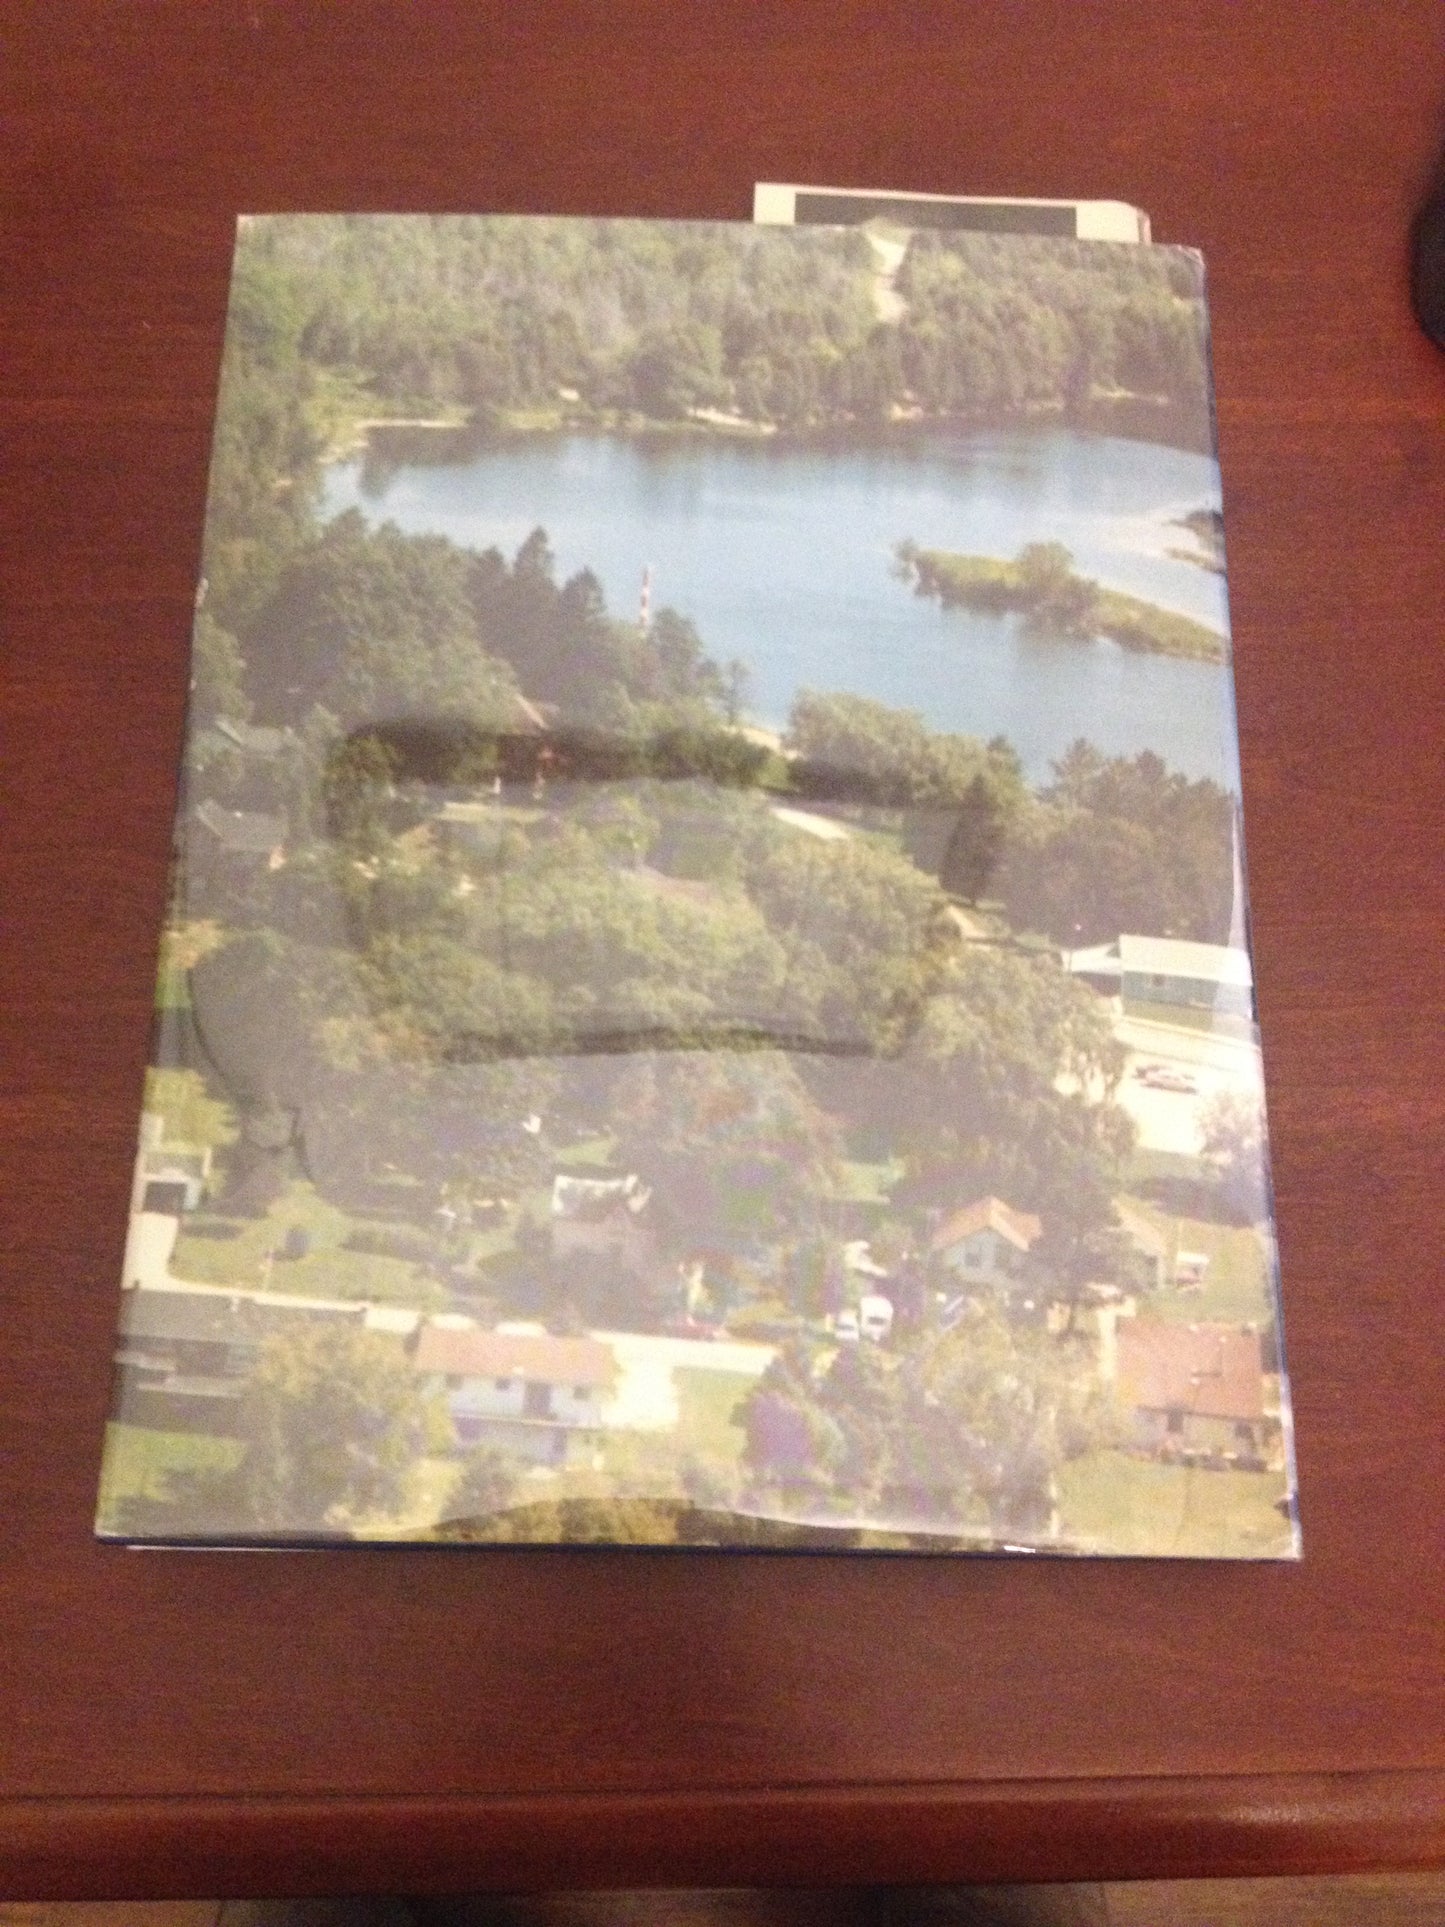 A HISTORY OF THE TOWN OF DURHAM 1842-1994 - DURHAM HISTORICAL COMMITTEE